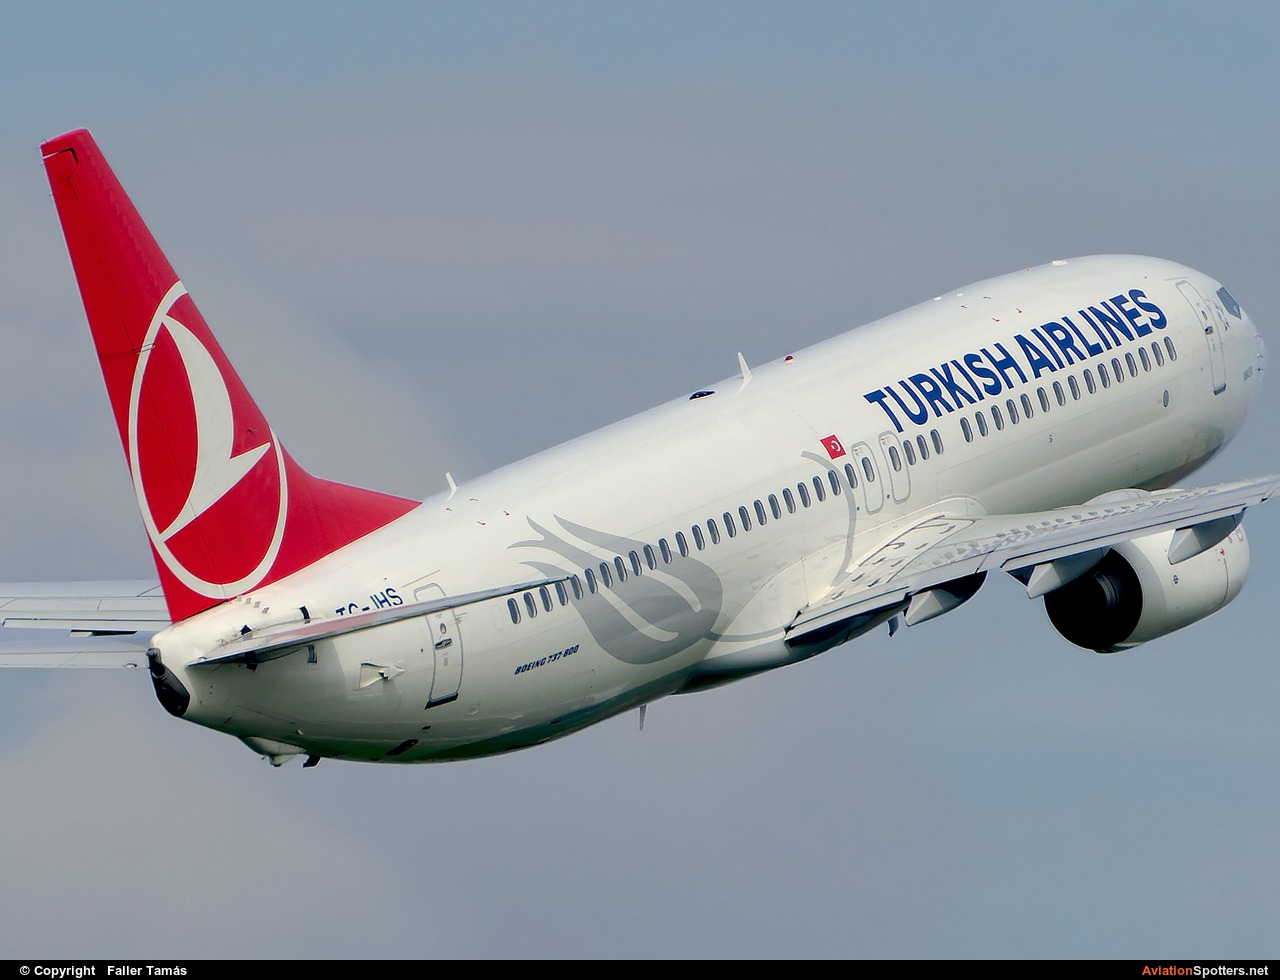 Turkish Airlines  -  737-800  (TC-JHS) By Faller Tamás (fallto78)